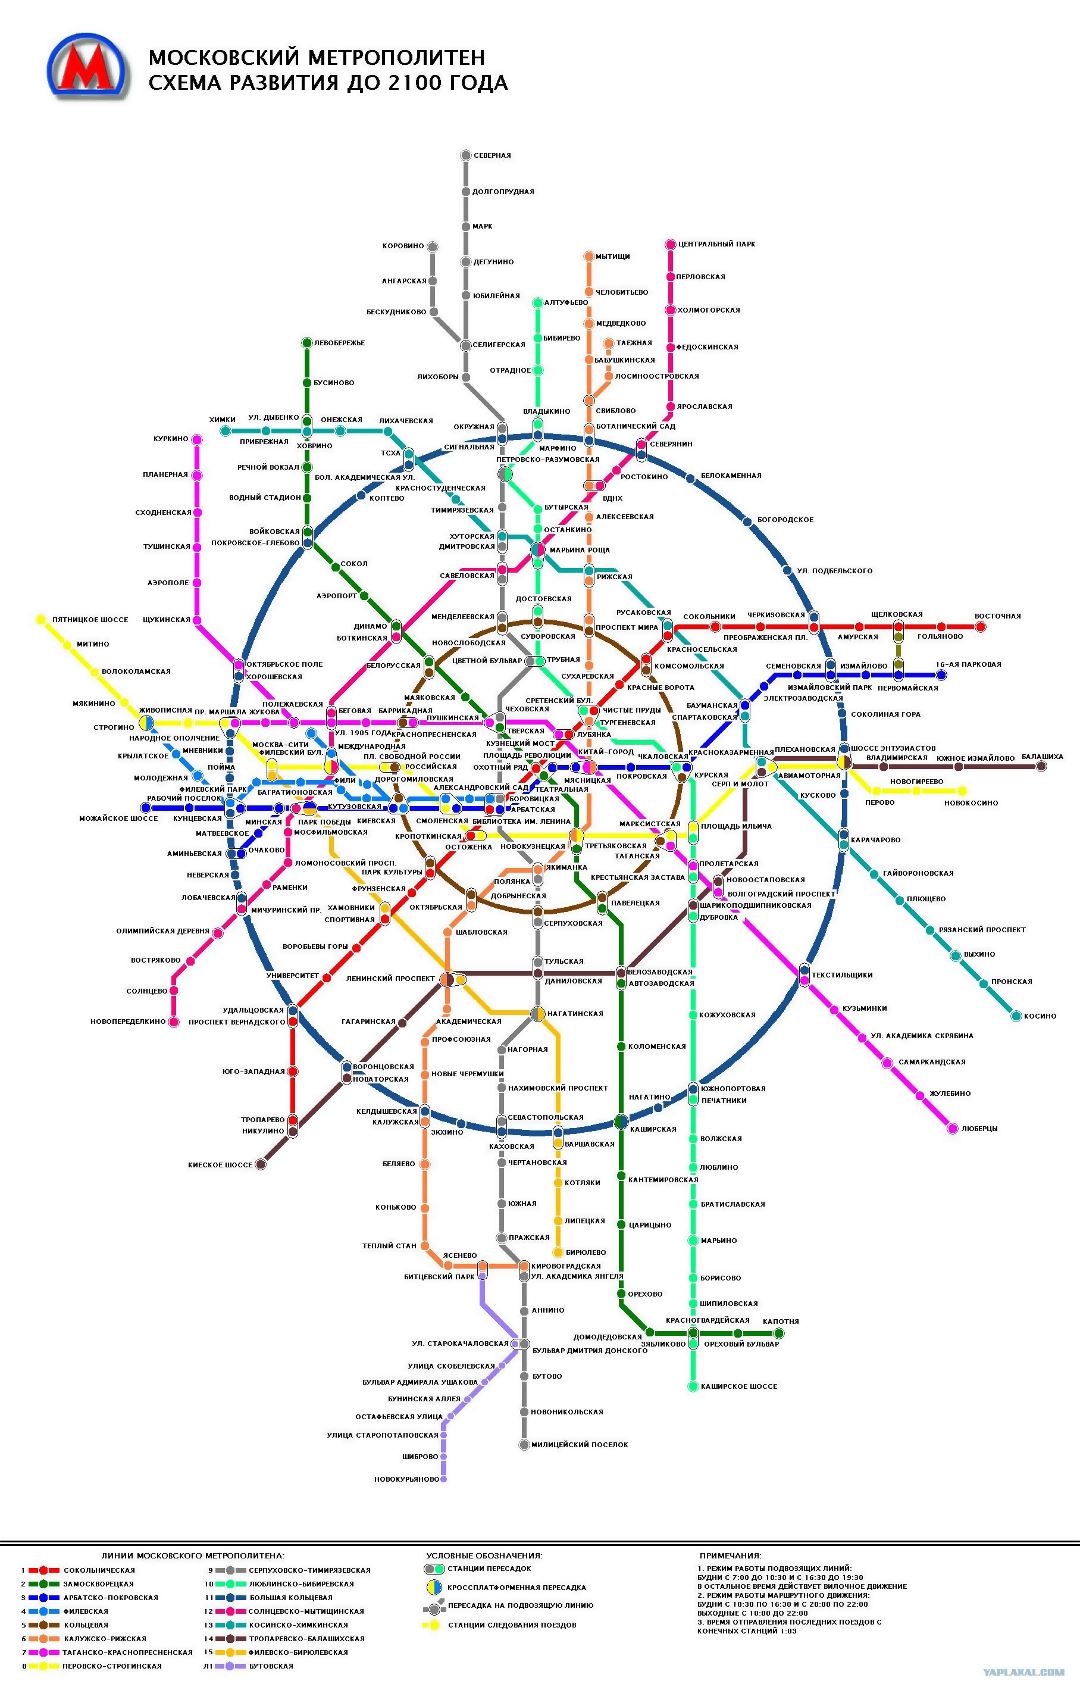 Large metro map of Moscow city in russian